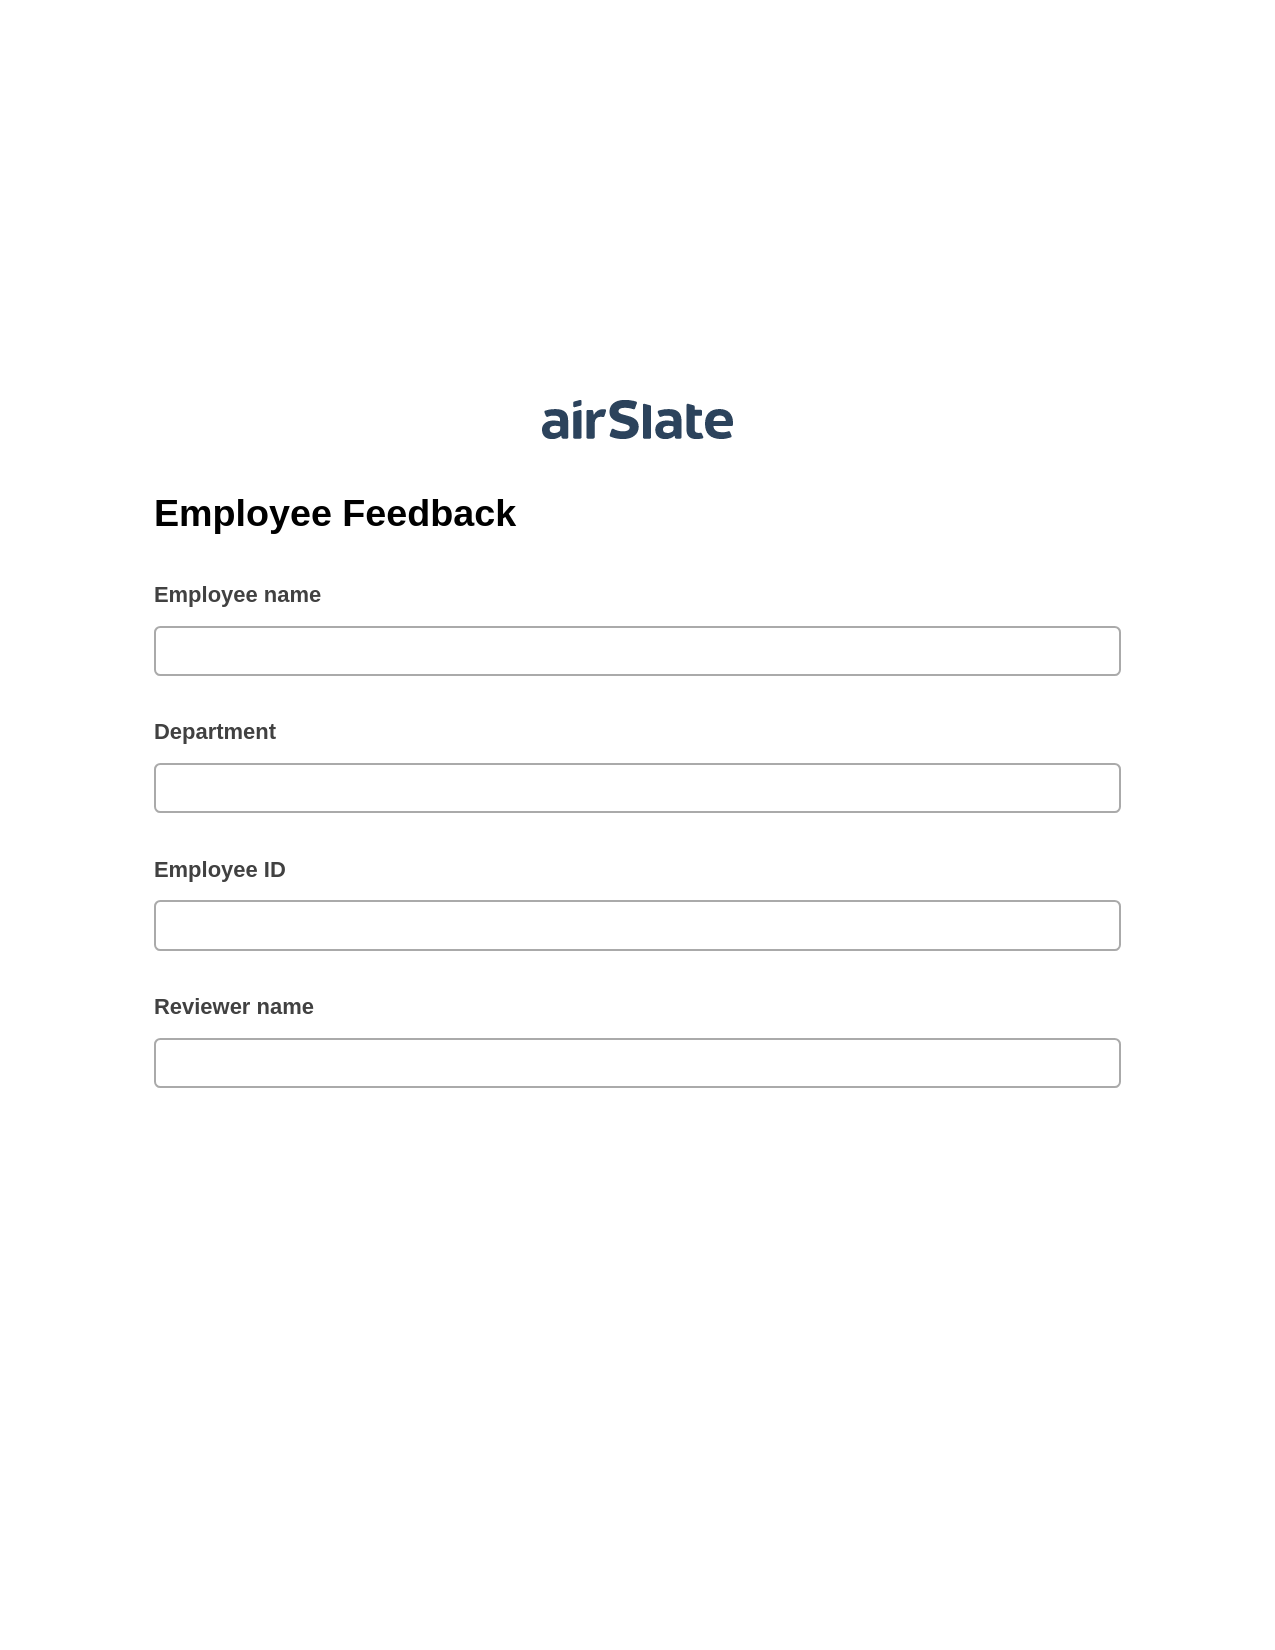 Employee Feedback Pre-fill from Salesforce Records with SOQL Bot, Update Salesforce Record Bot, Post-finish Document Bot